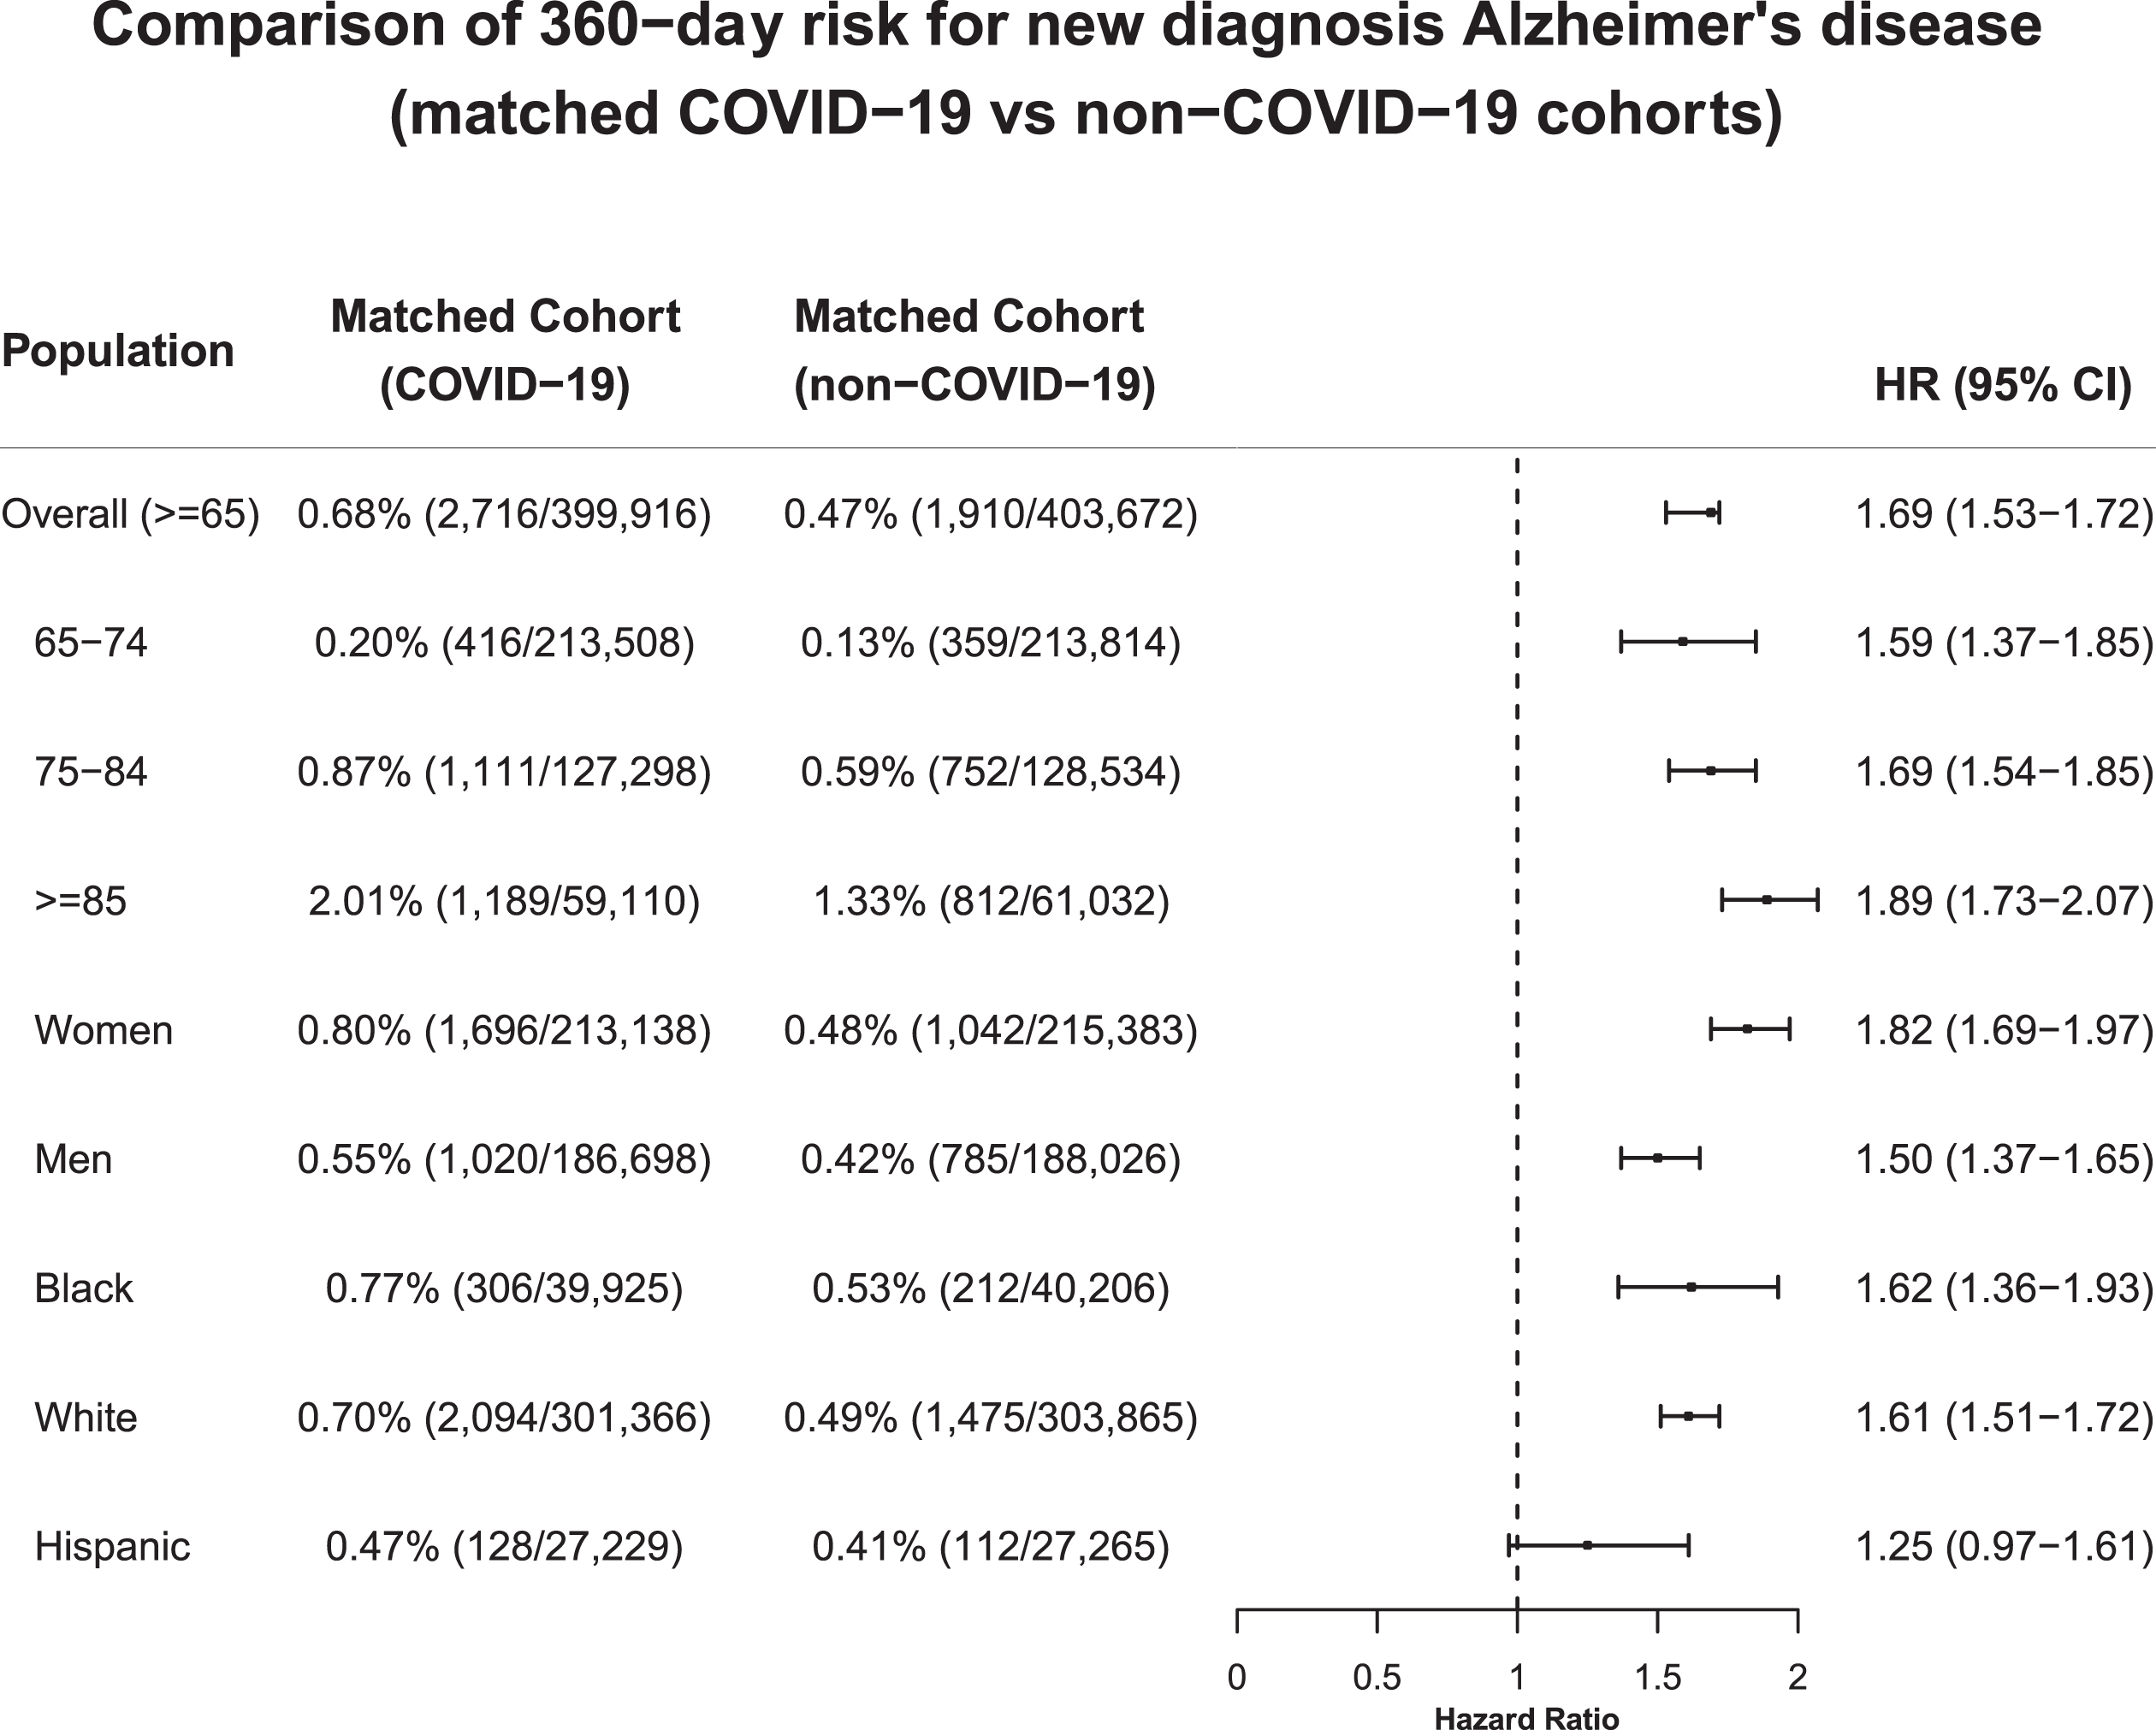 Comparison of 180-day risk for new diagnosis of Alzheimer’s disease between propensity-score matched COVID-19 and non-COVID-19 cohorts. COVID-19 cohort— older adults (age ≥65) who contracted COVID-19 between 2/2020–5/2021. Non-COVID-19 cohort— older adults (age ≥65) who had no documented COVID-19 in their EHRs but had medical encounters with healthcare organizations between 2/2020–5/2021. Cohorts were propensity-score matched for demographics (age, gender, race/ethnicity), socioeconomic factors and Alzheimer’s disease-related comorbidities and behavioral factors as per Table 1.